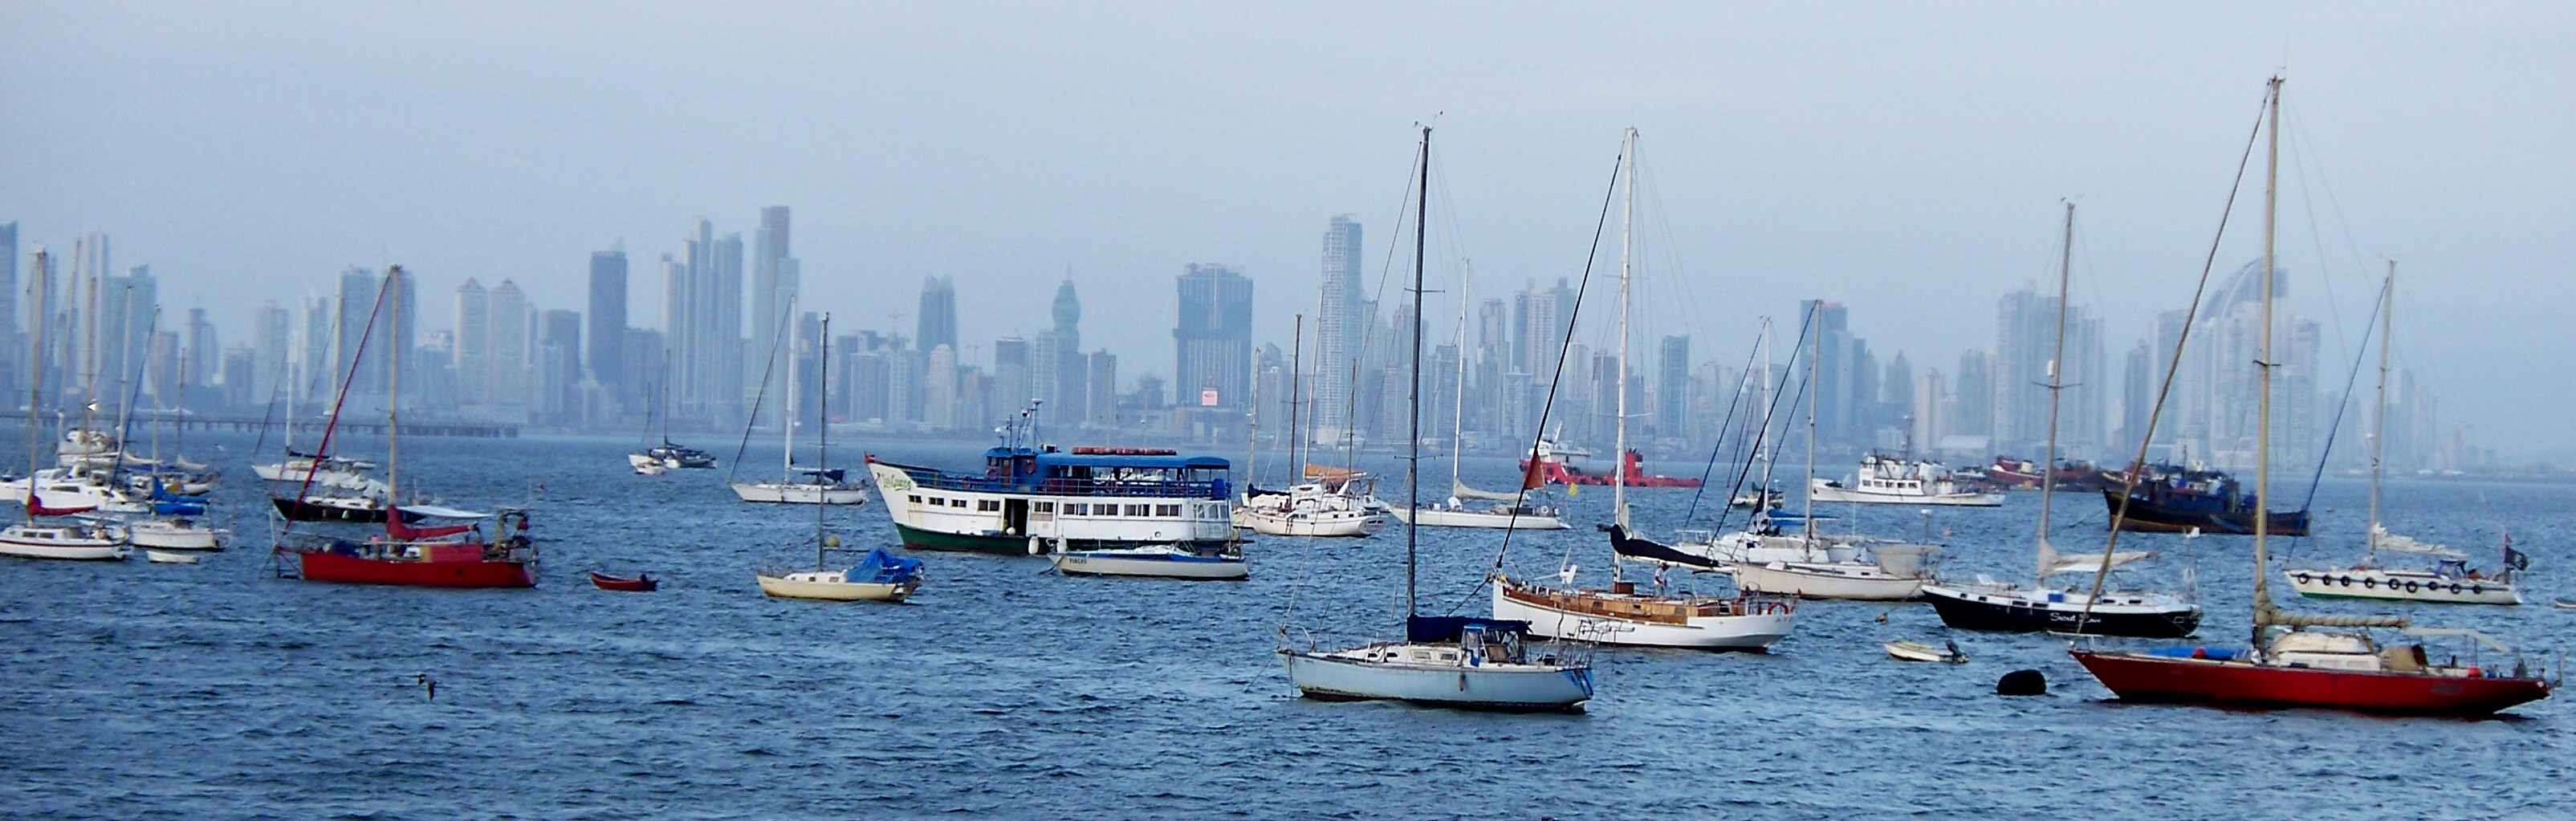 Yachts bob at anchor on the Amador Causeway. Beyond is the shimmering haze of the Panama City skyline.